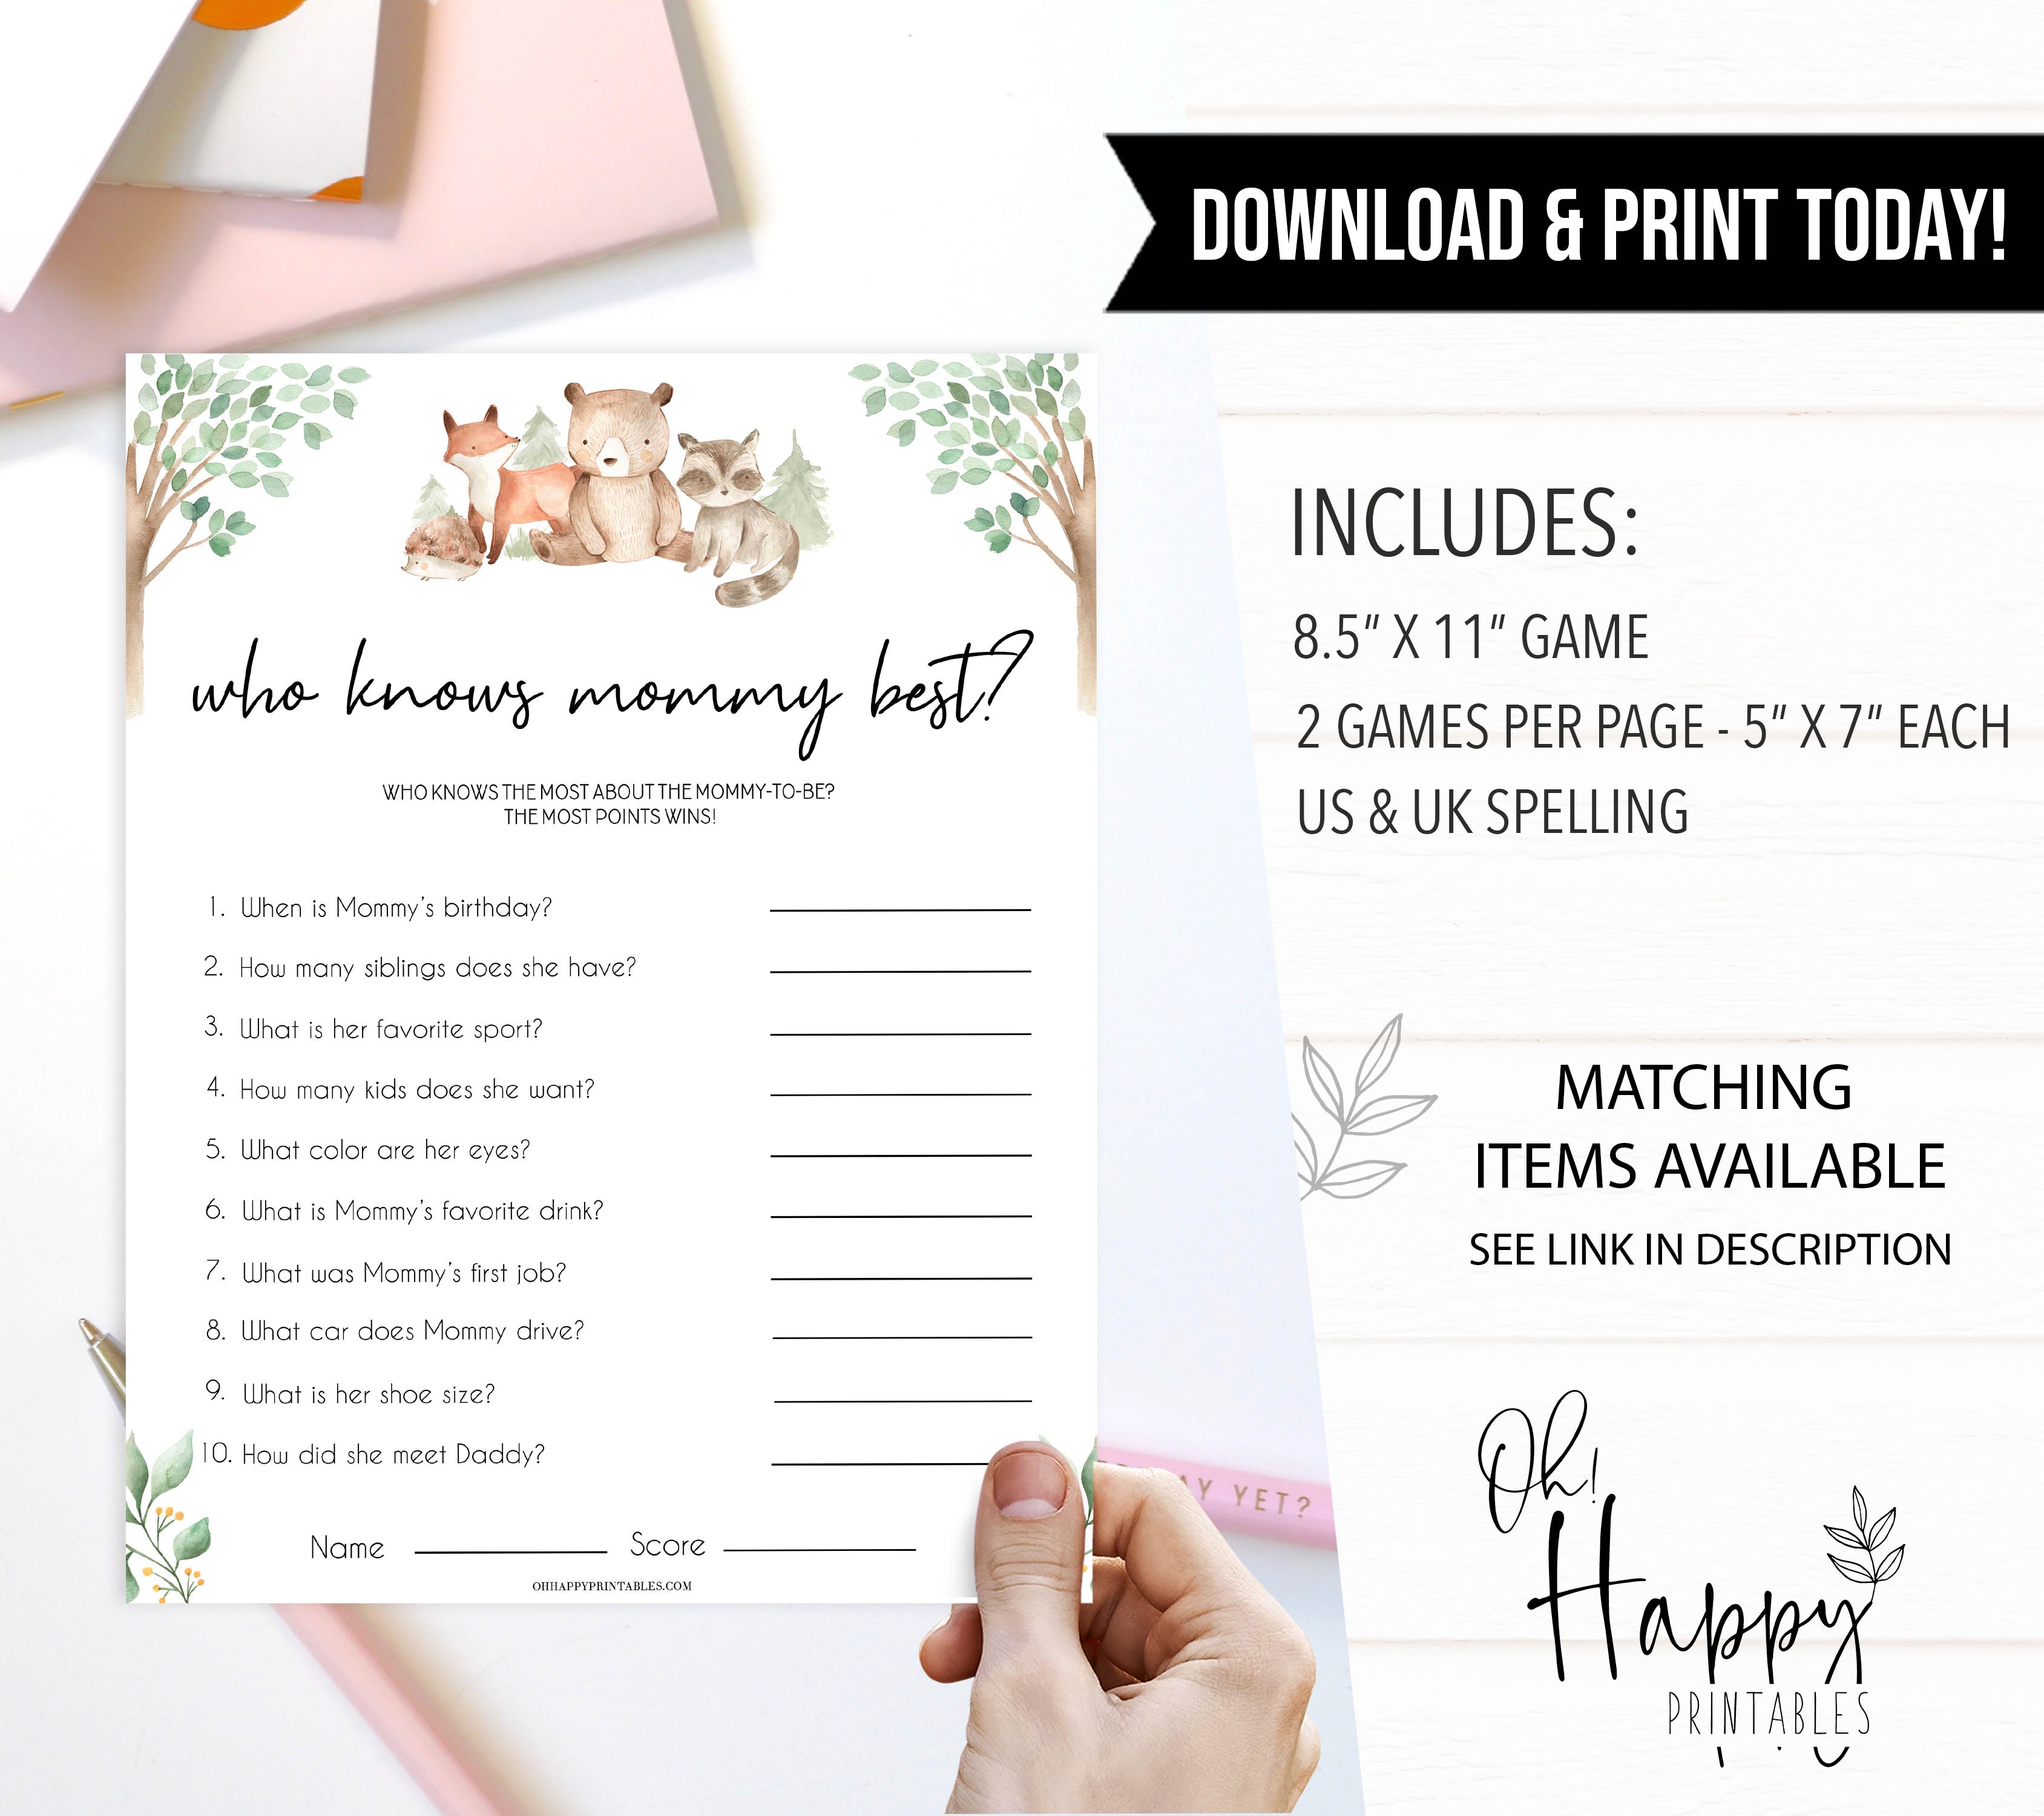 who knows mommy best baby game, Printable baby shower games, woodland animals baby games, baby shower games, fun baby shower ideas, top baby shower ideas, woodland baby shower, baby shower games, fun woodland animals baby shower ideas